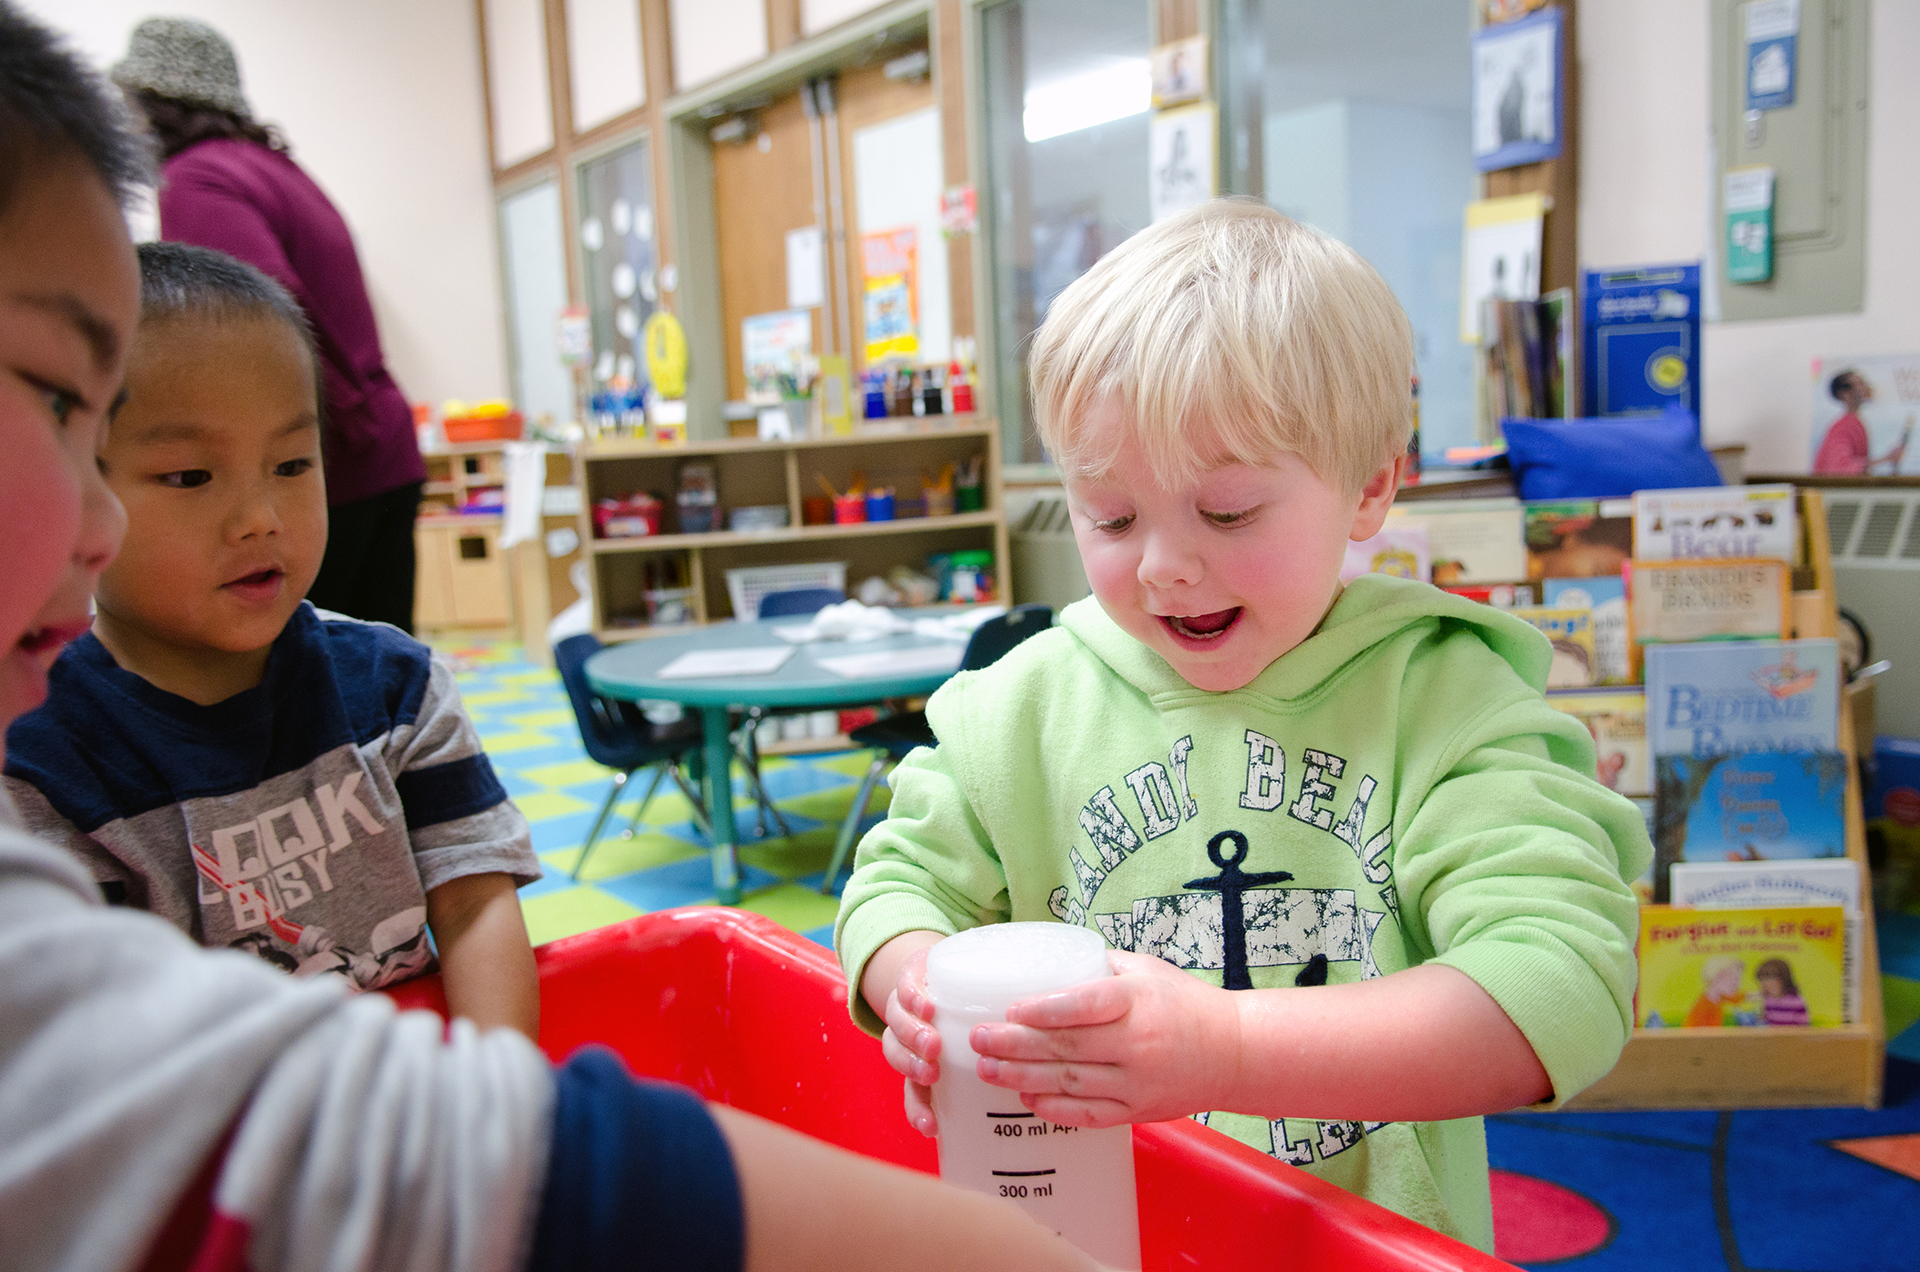 Getting specific about what works in early learning classrooms, 2 column